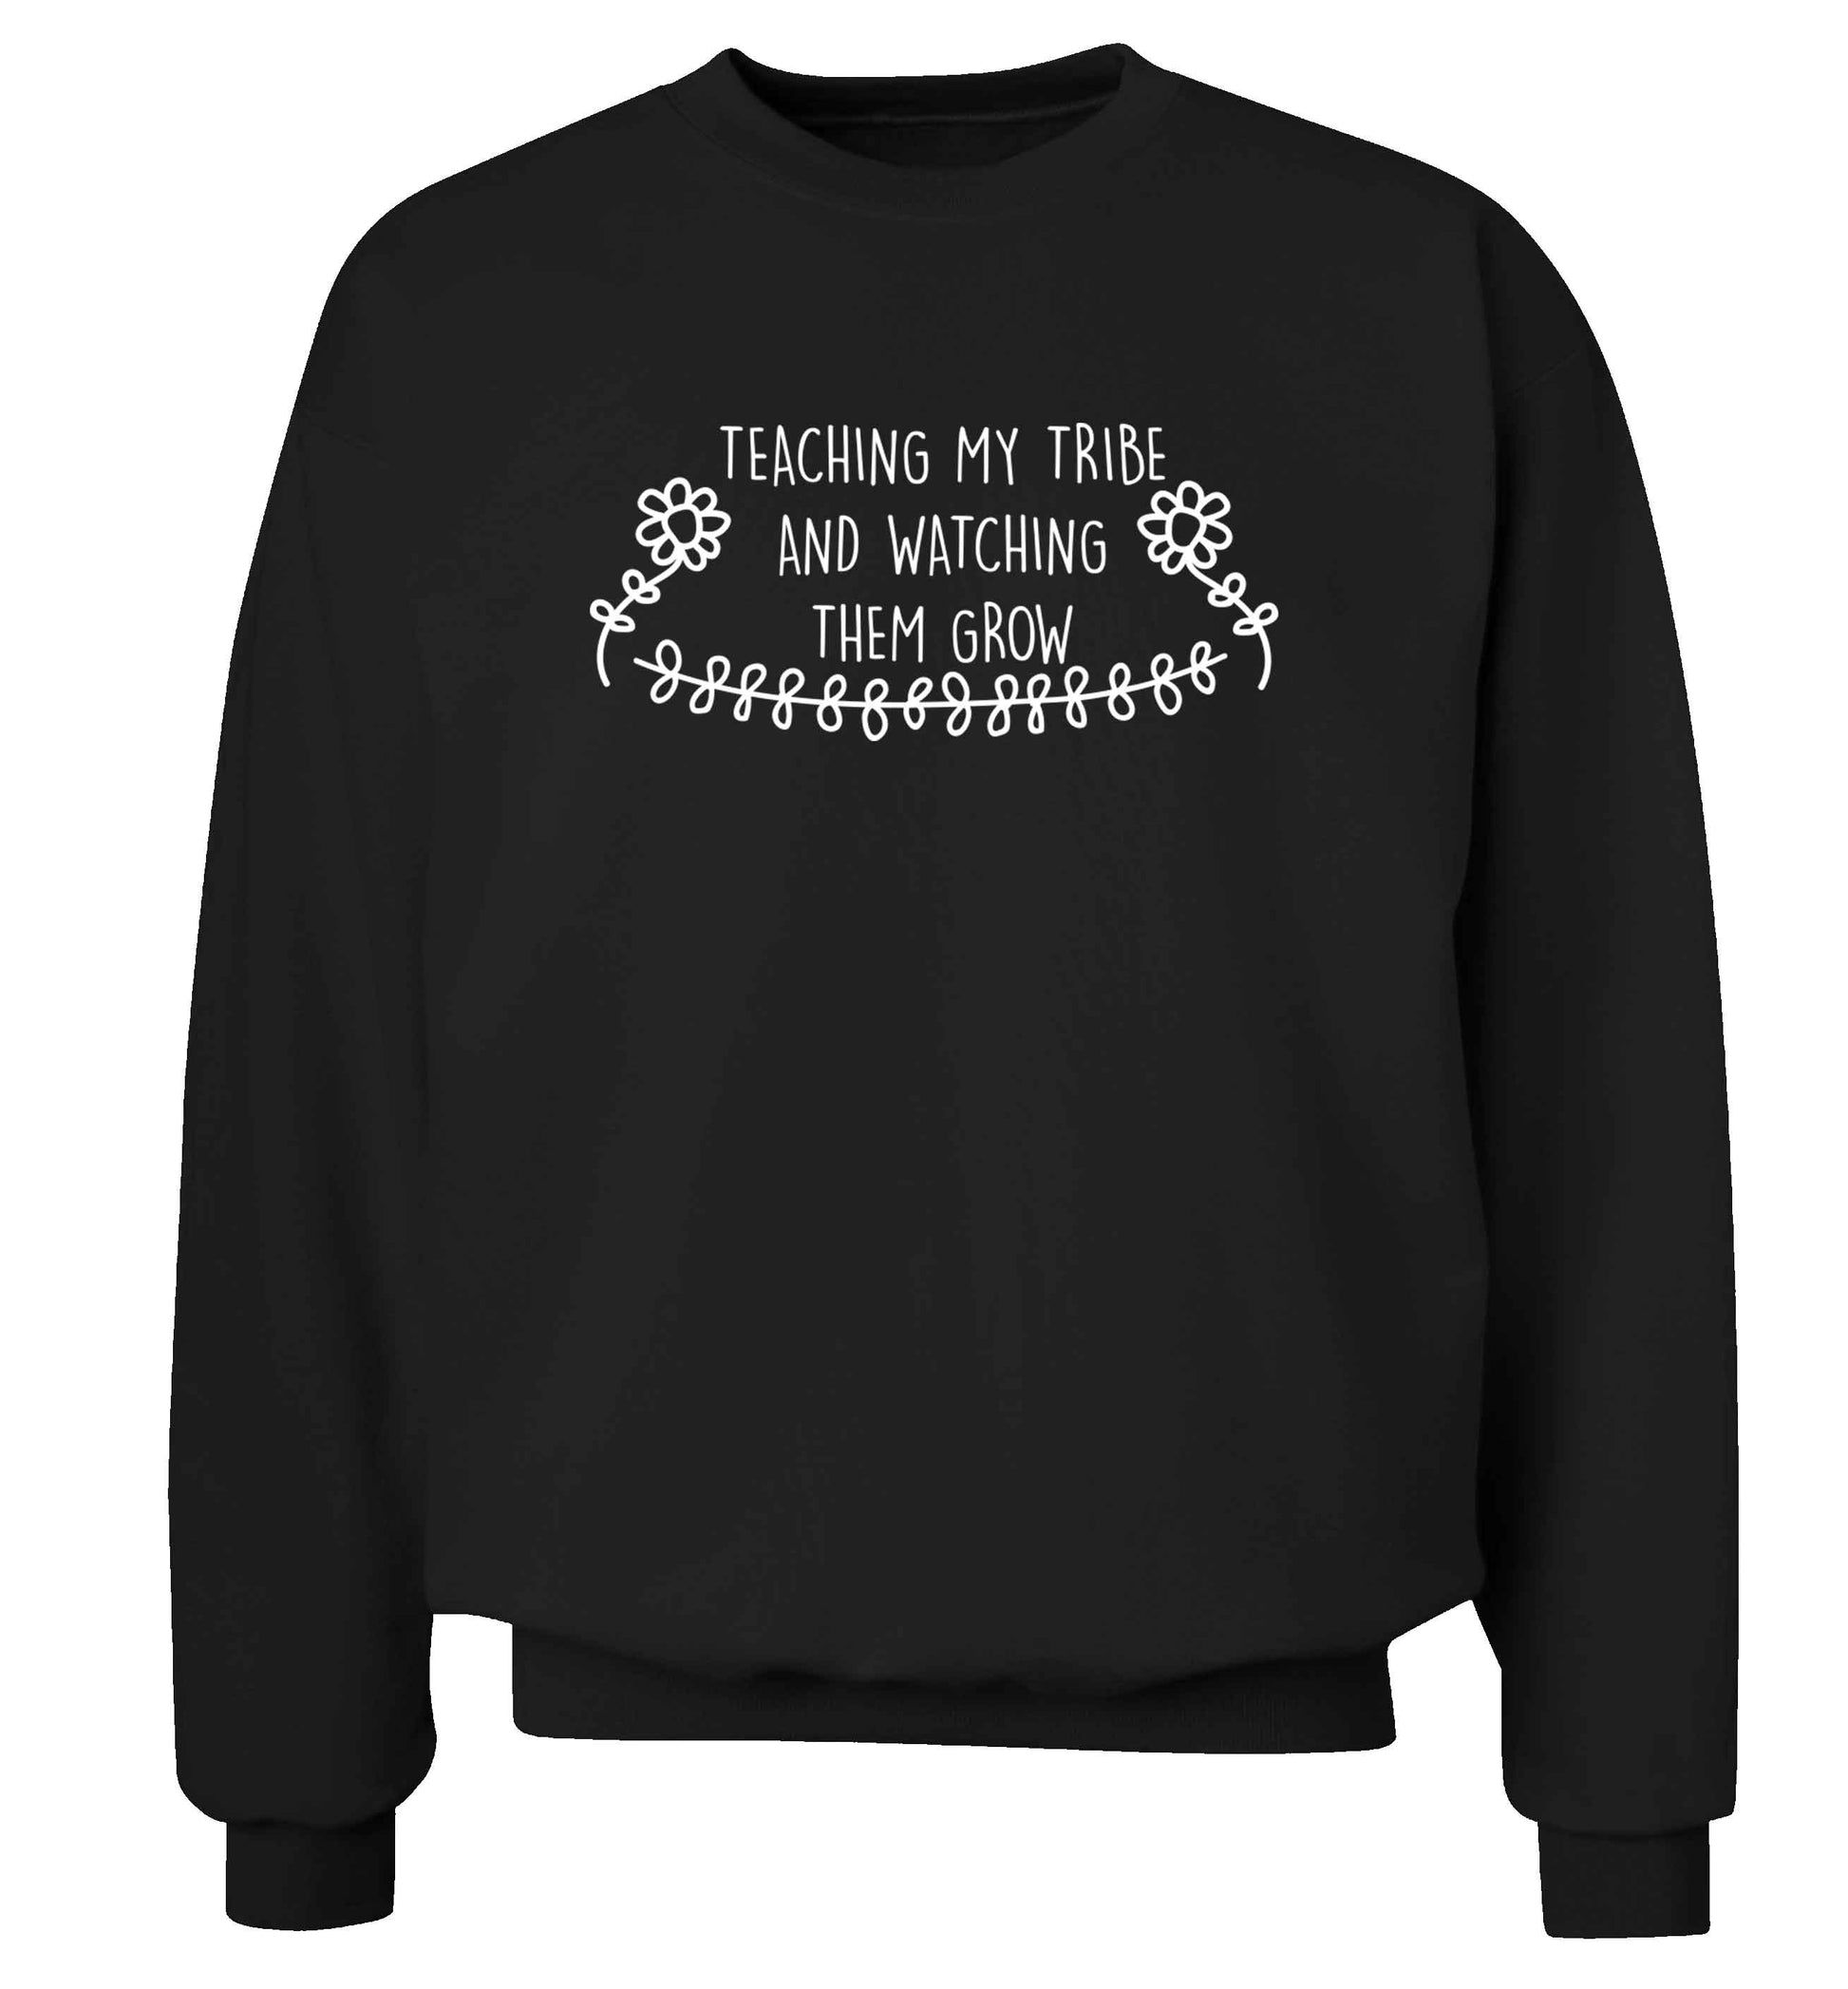 Teaching my tribe and watching them grow Adult's unisex black Sweater 2XL